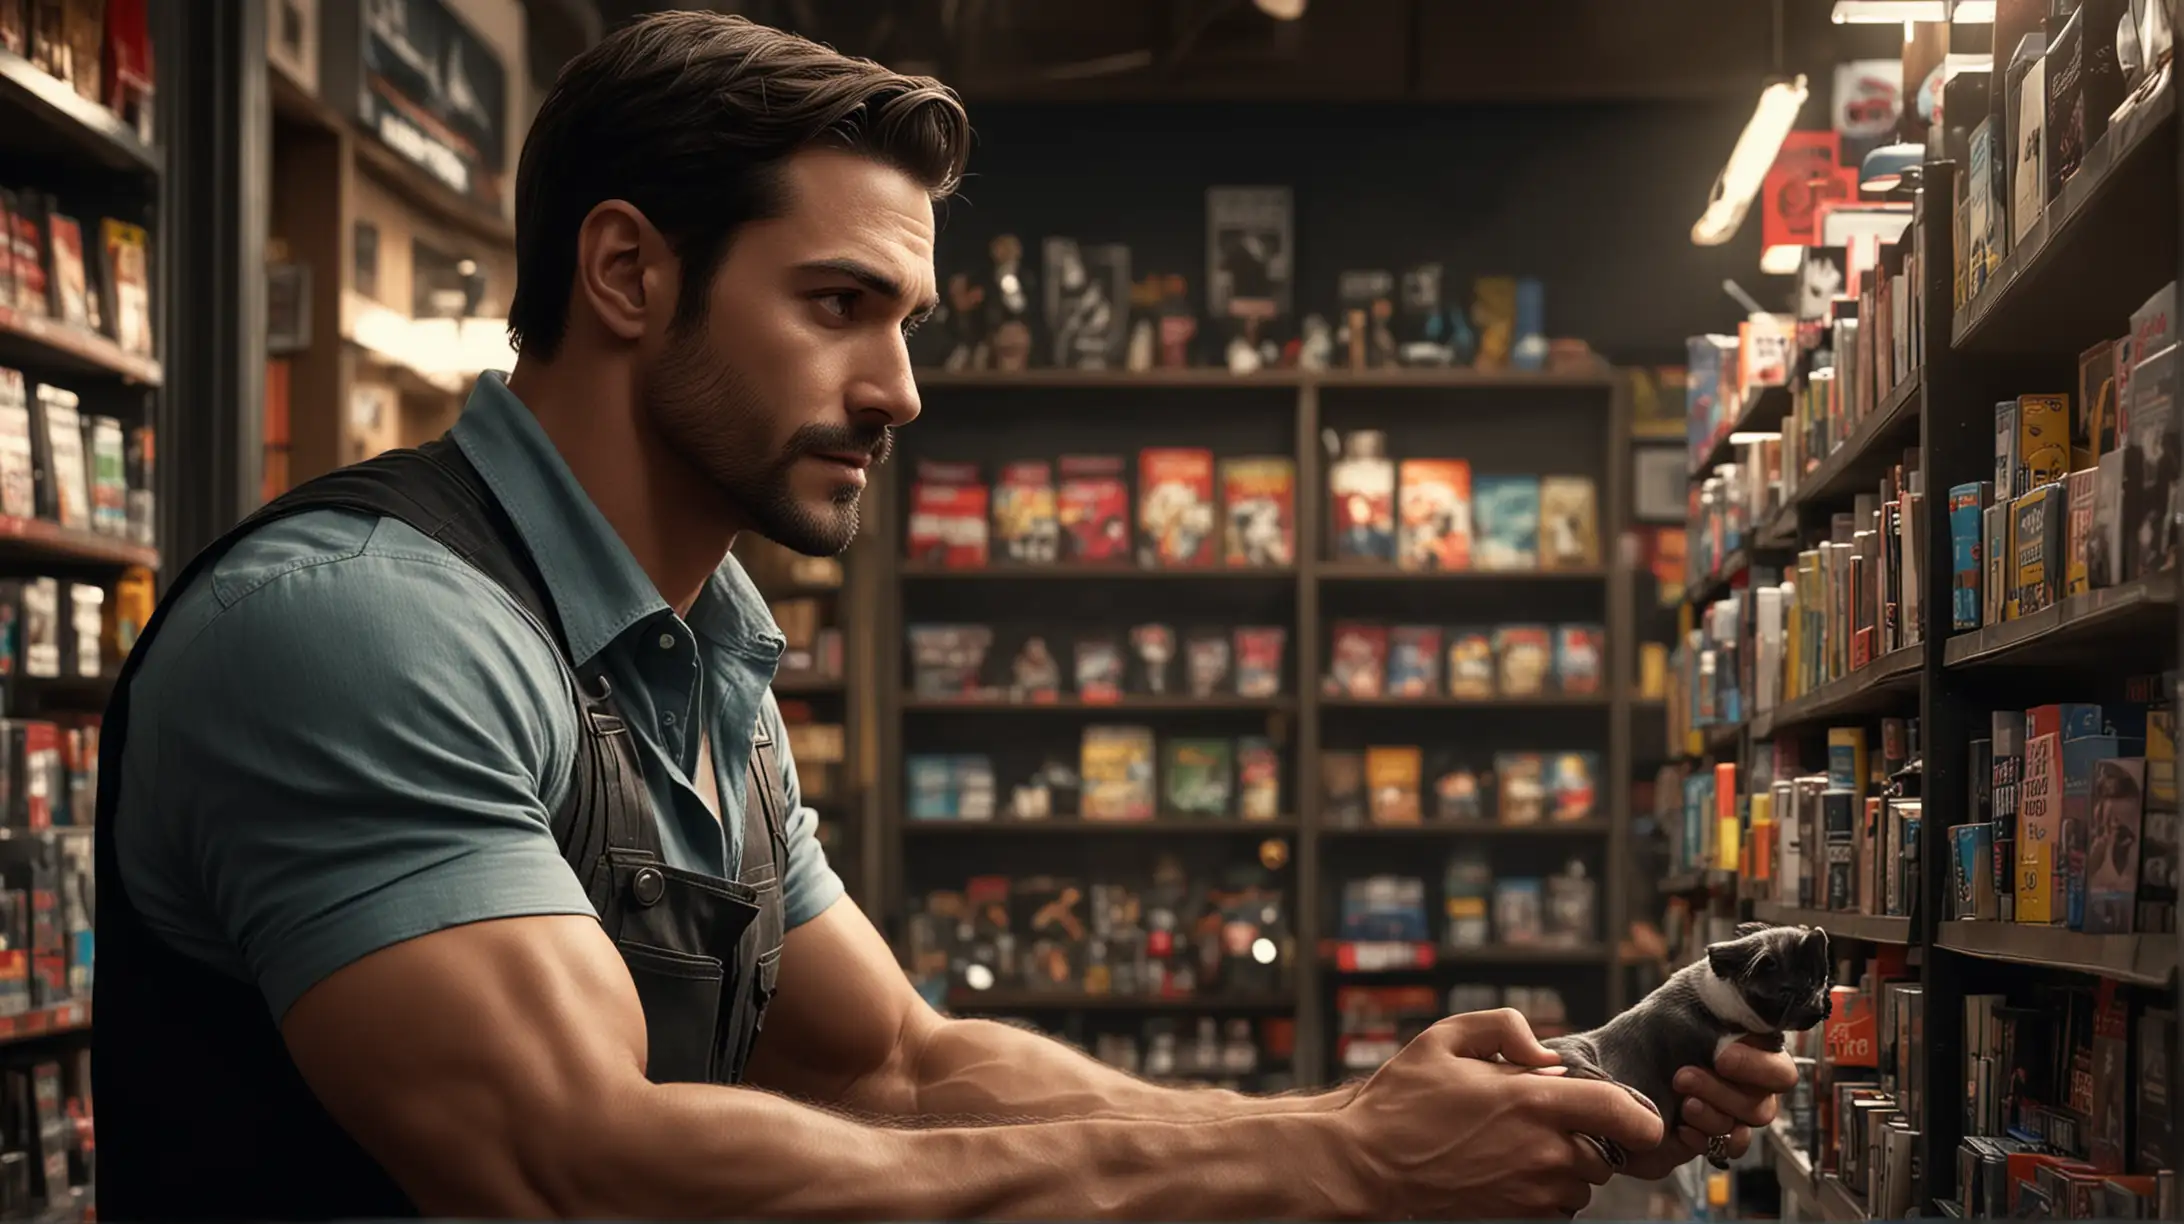 Muscular Pet Store Owner Conversing with Adorable Boy in Spirited Noir Atmosphere